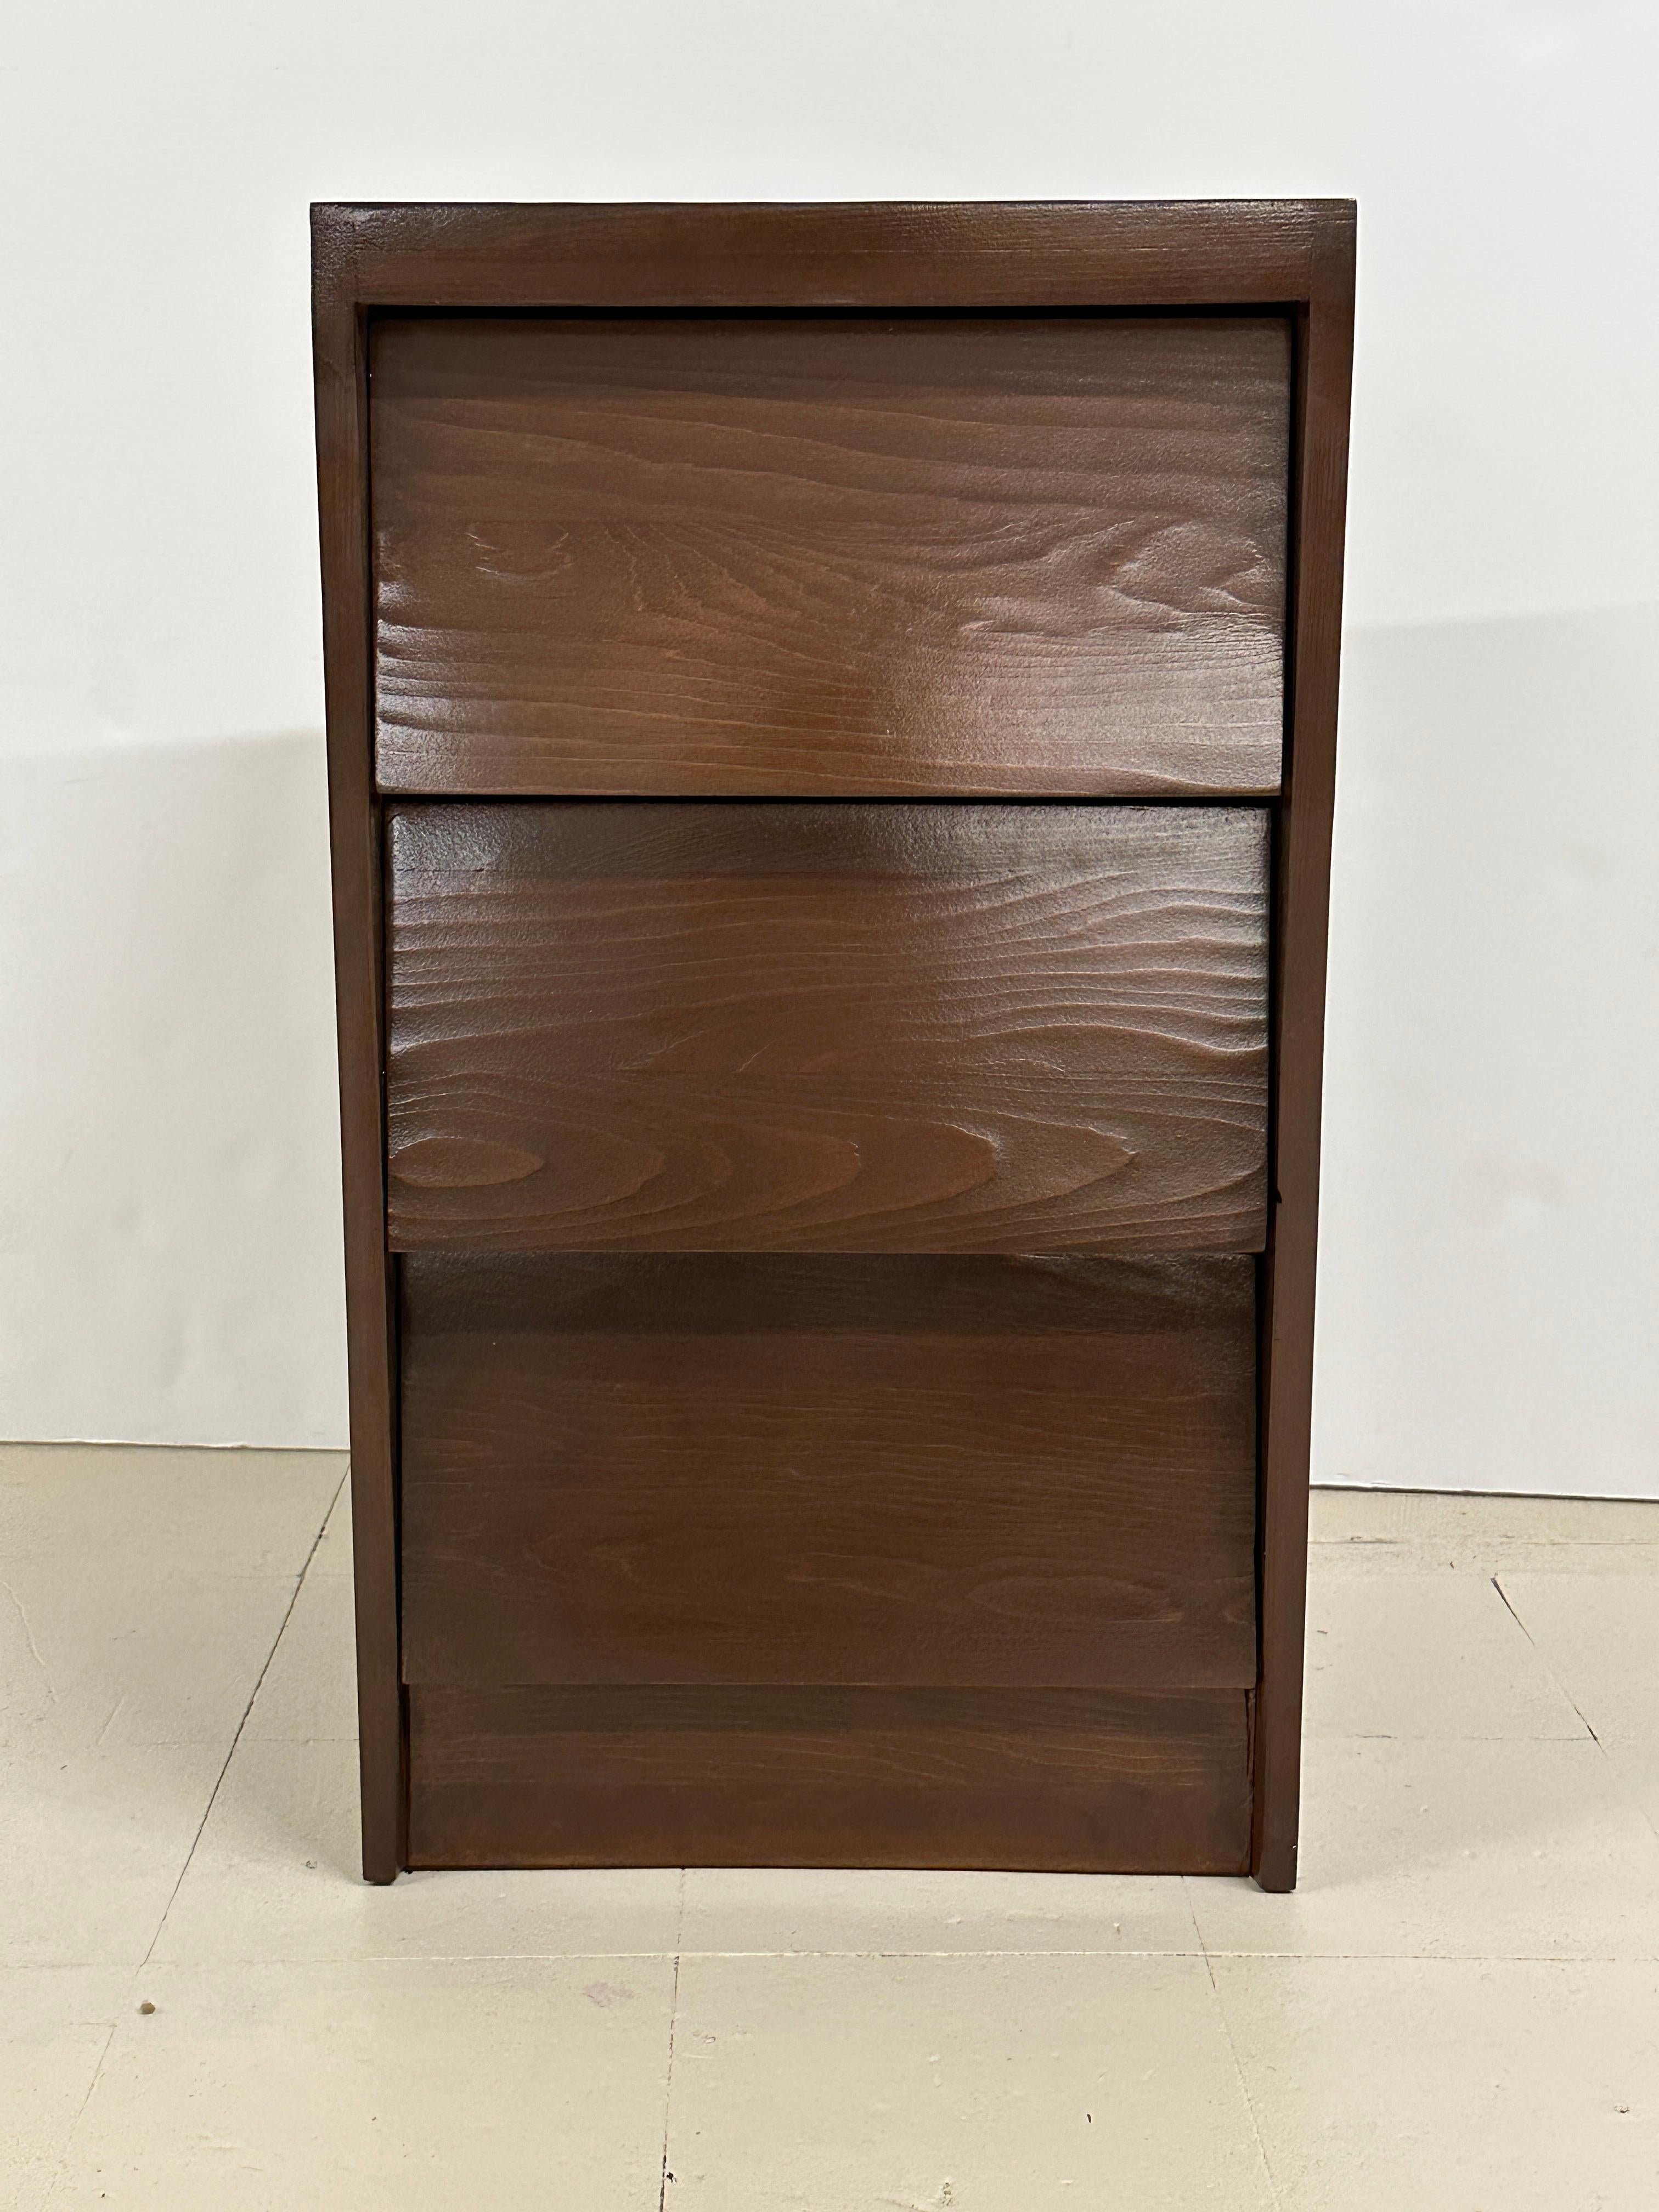 These nightstands/side tables boast clean lines and a minimalist aesthetic that seamlessly blends form and function. Crafted from solid birch, each piece is thoughtfully designed with three drawers, offering ample storage space while maintaining a